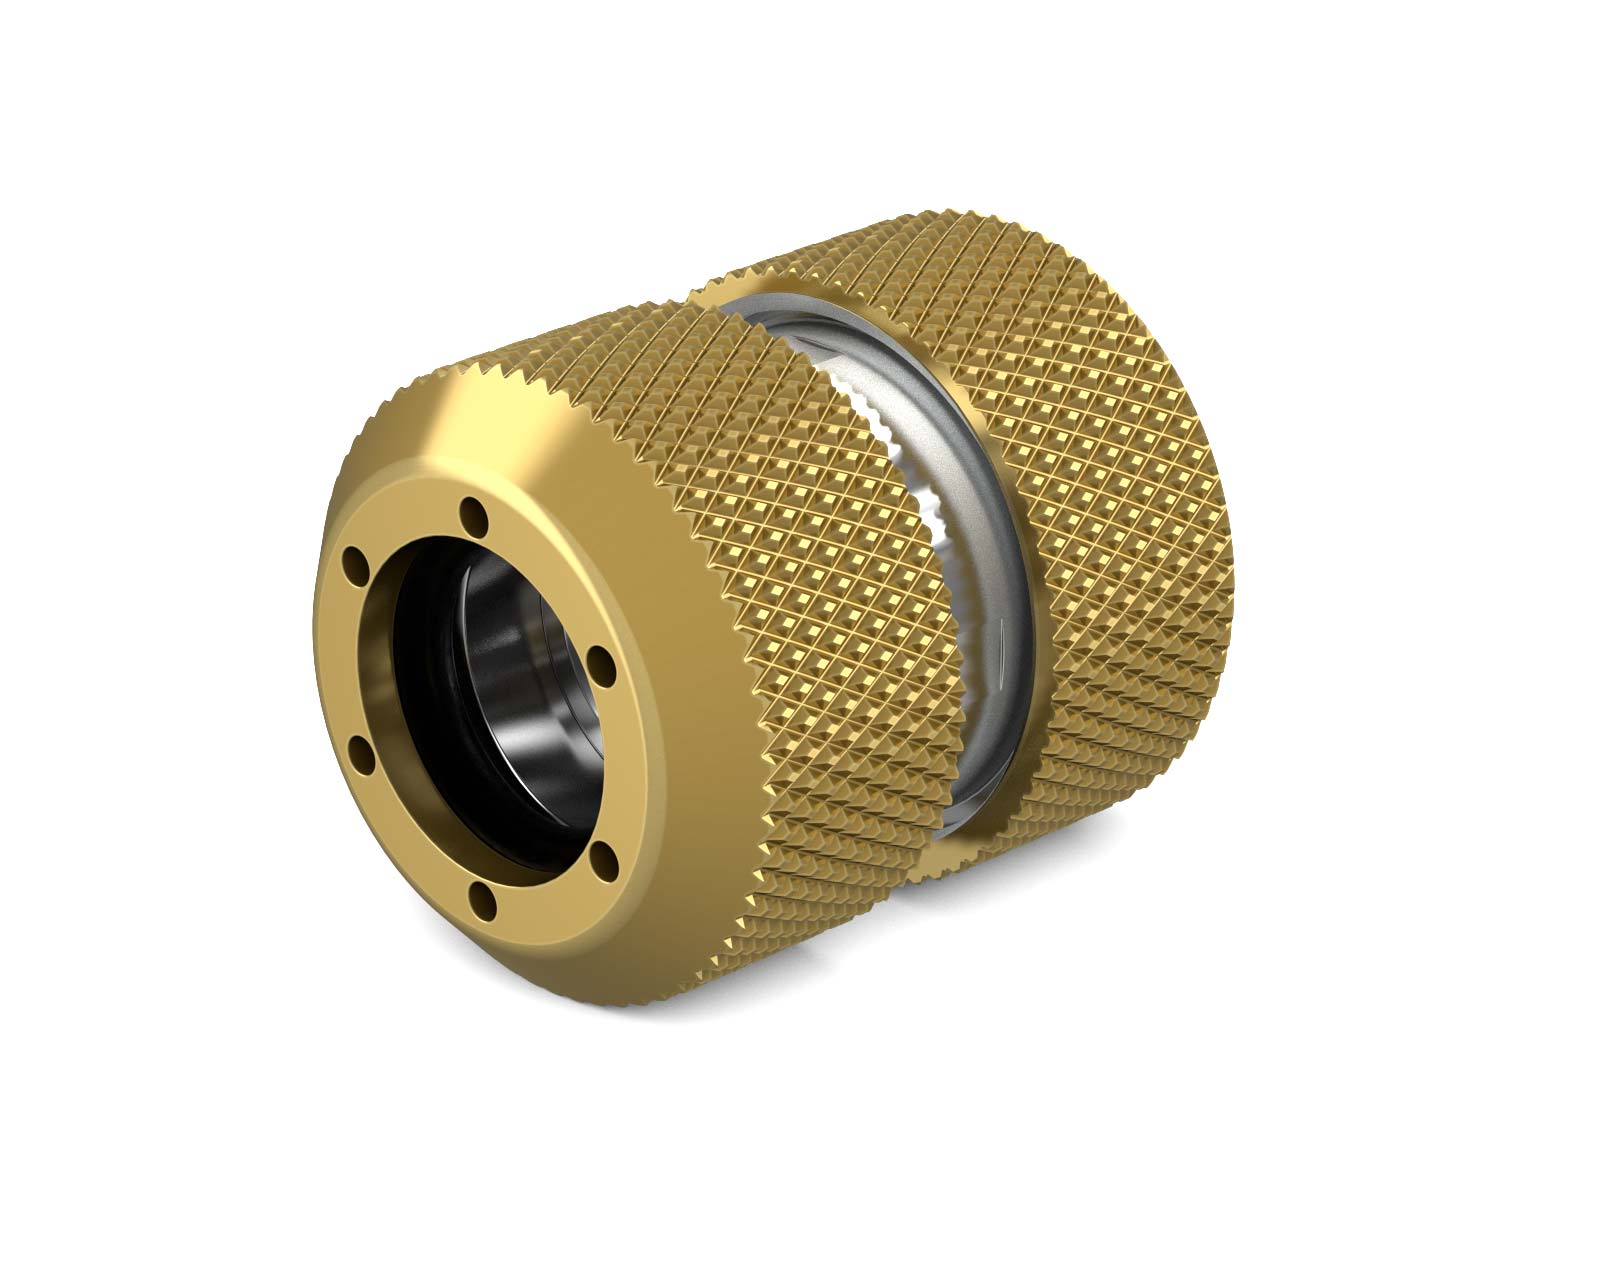 PrimoChill 1/2in. Rigid RevolverSX Series Coupler Fitting - PrimoChill - KEEPING IT COOL Candy Gold